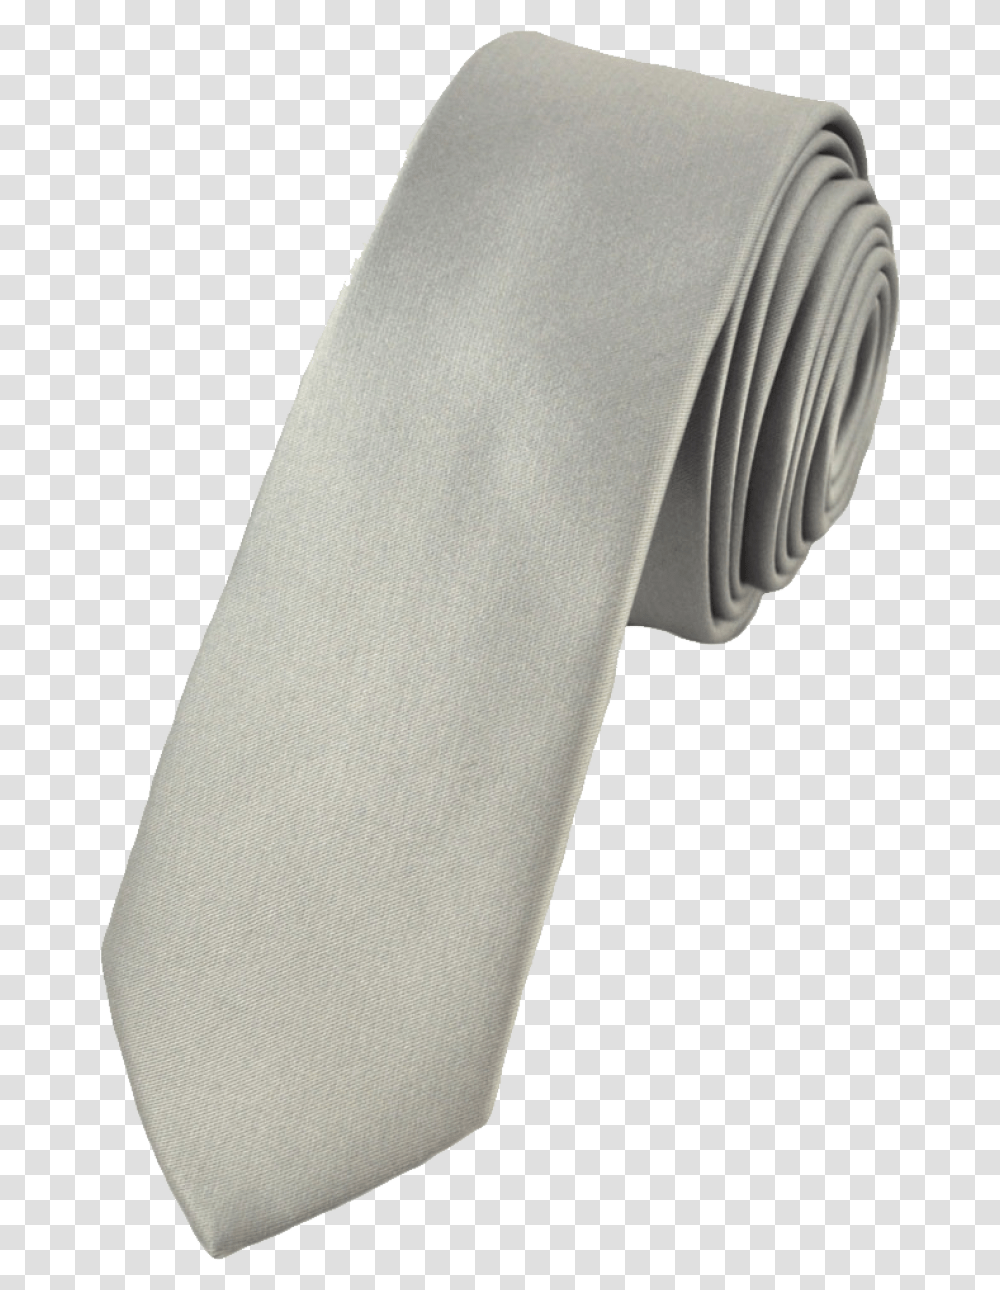 Grey Tie Image Portable Network Graphics, Accessories, Accessory, Necktie, Rug Transparent Png